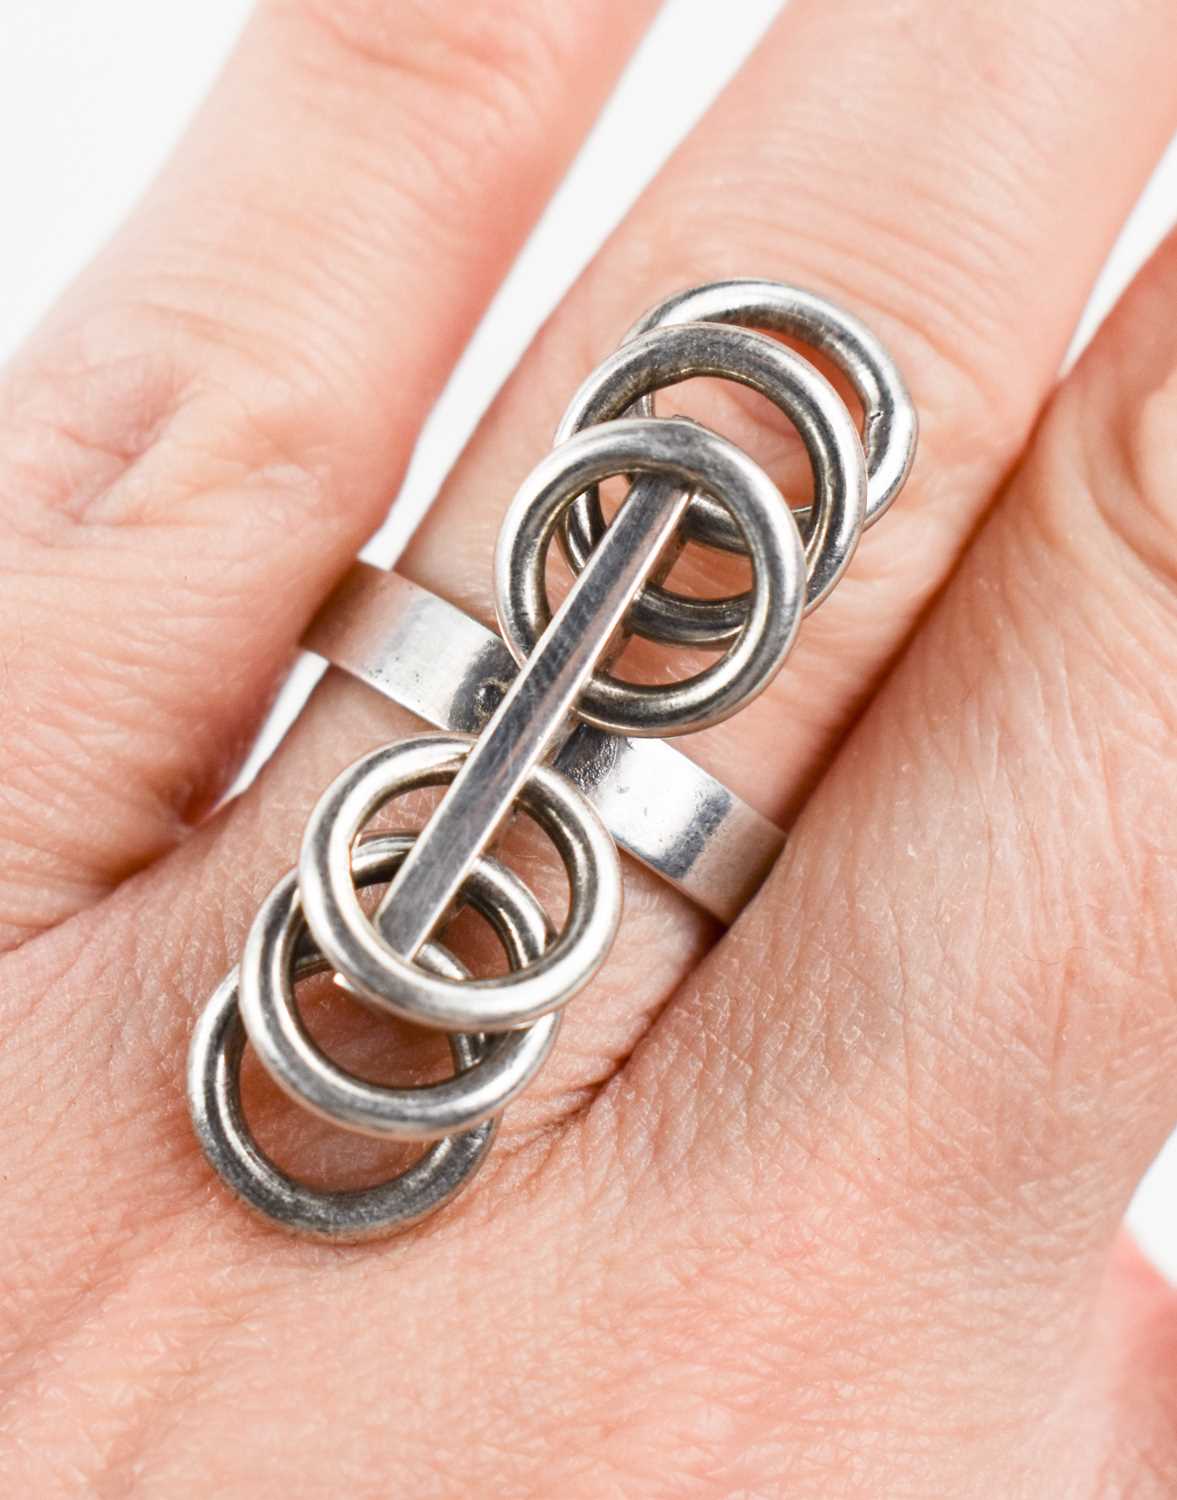 Hans Hansen of Denmark silver ring, composed of multiple hoops that move freely, stamped HaH, size